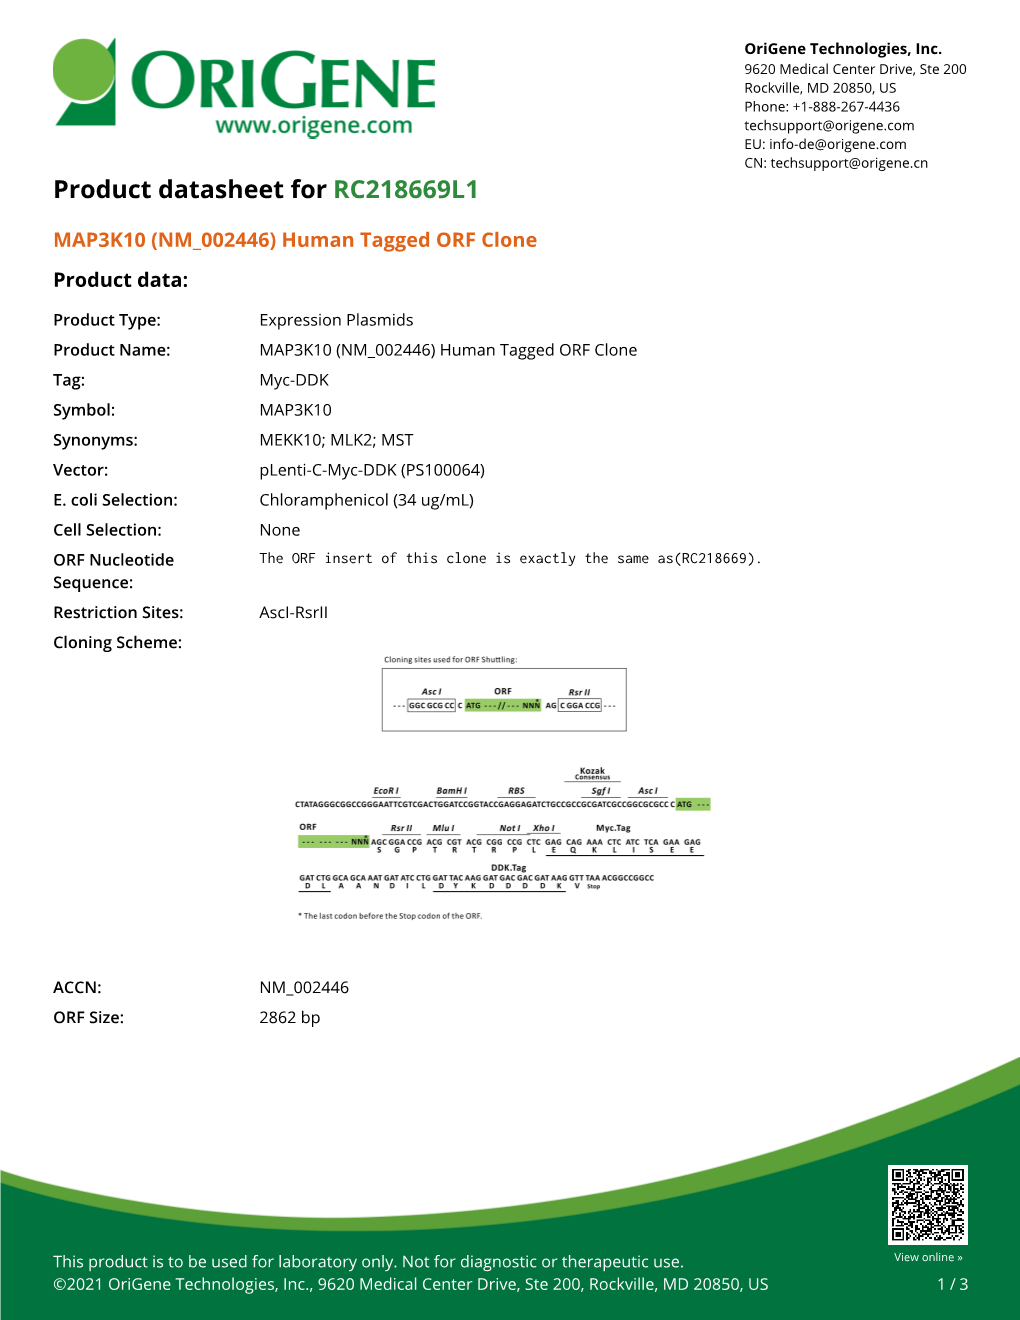 MAP3K10 (NM 002446) Human Tagged ORF Clone Product Data